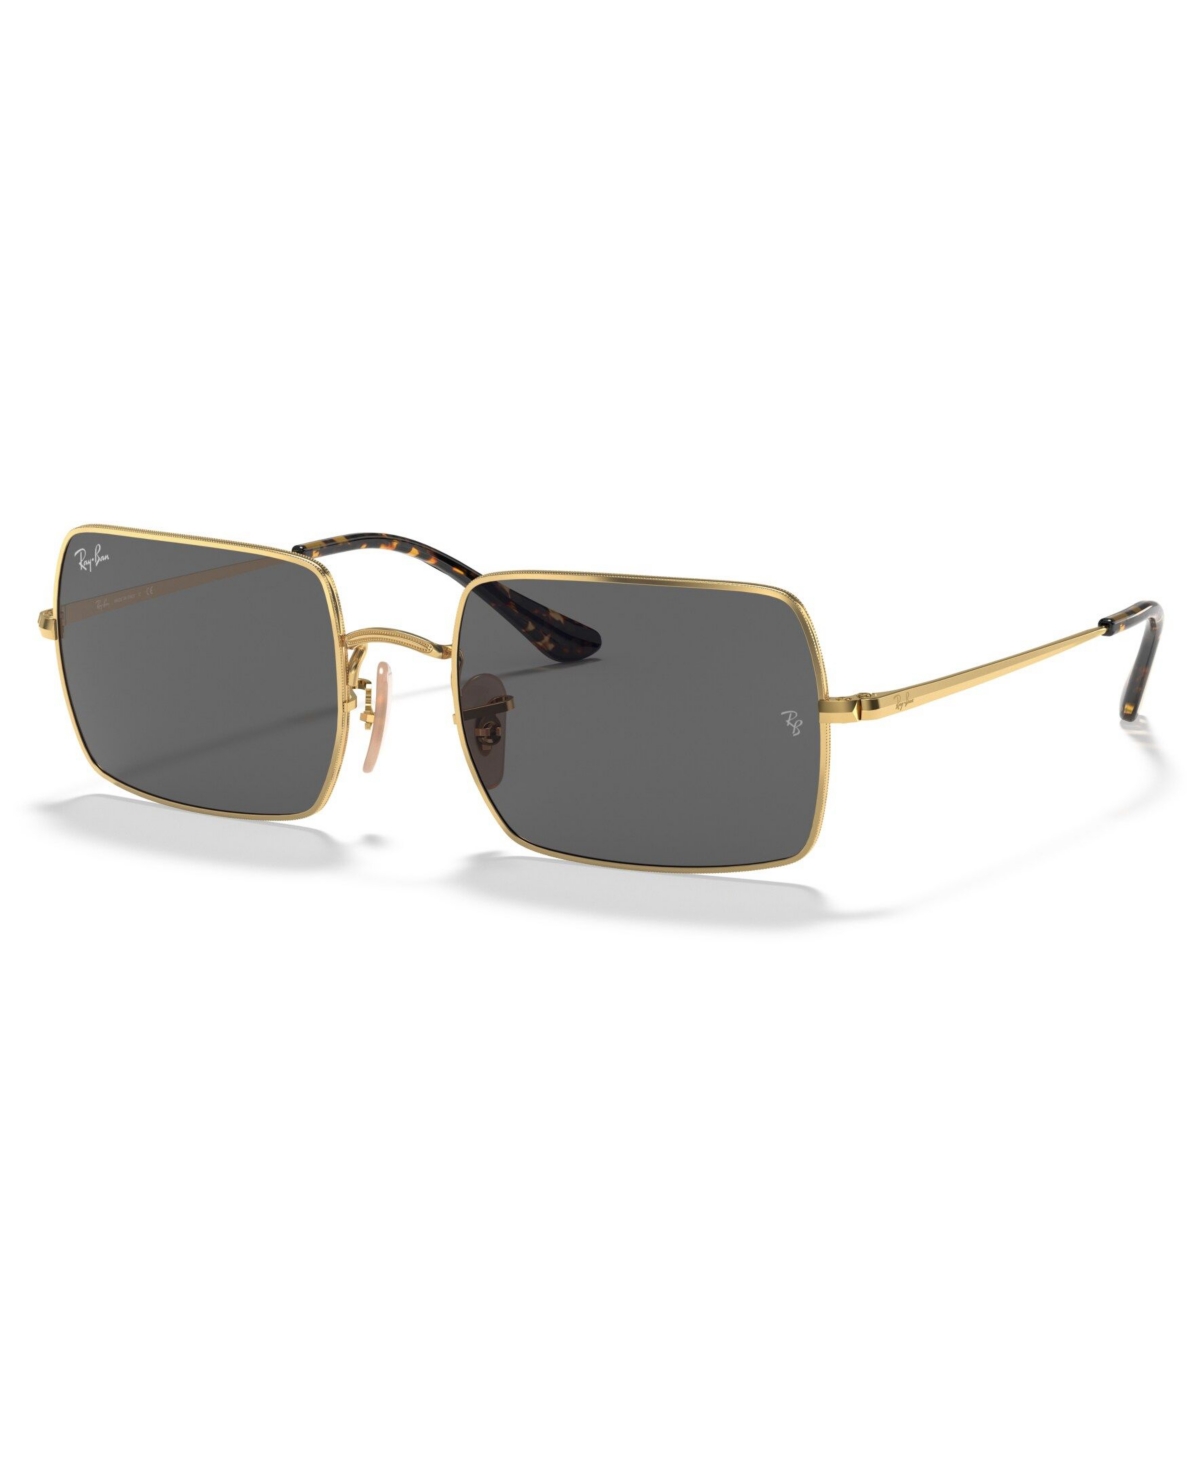 Ray Ban Women's Square Sunglasses, Rb1971 54 In Gold,dark Grey